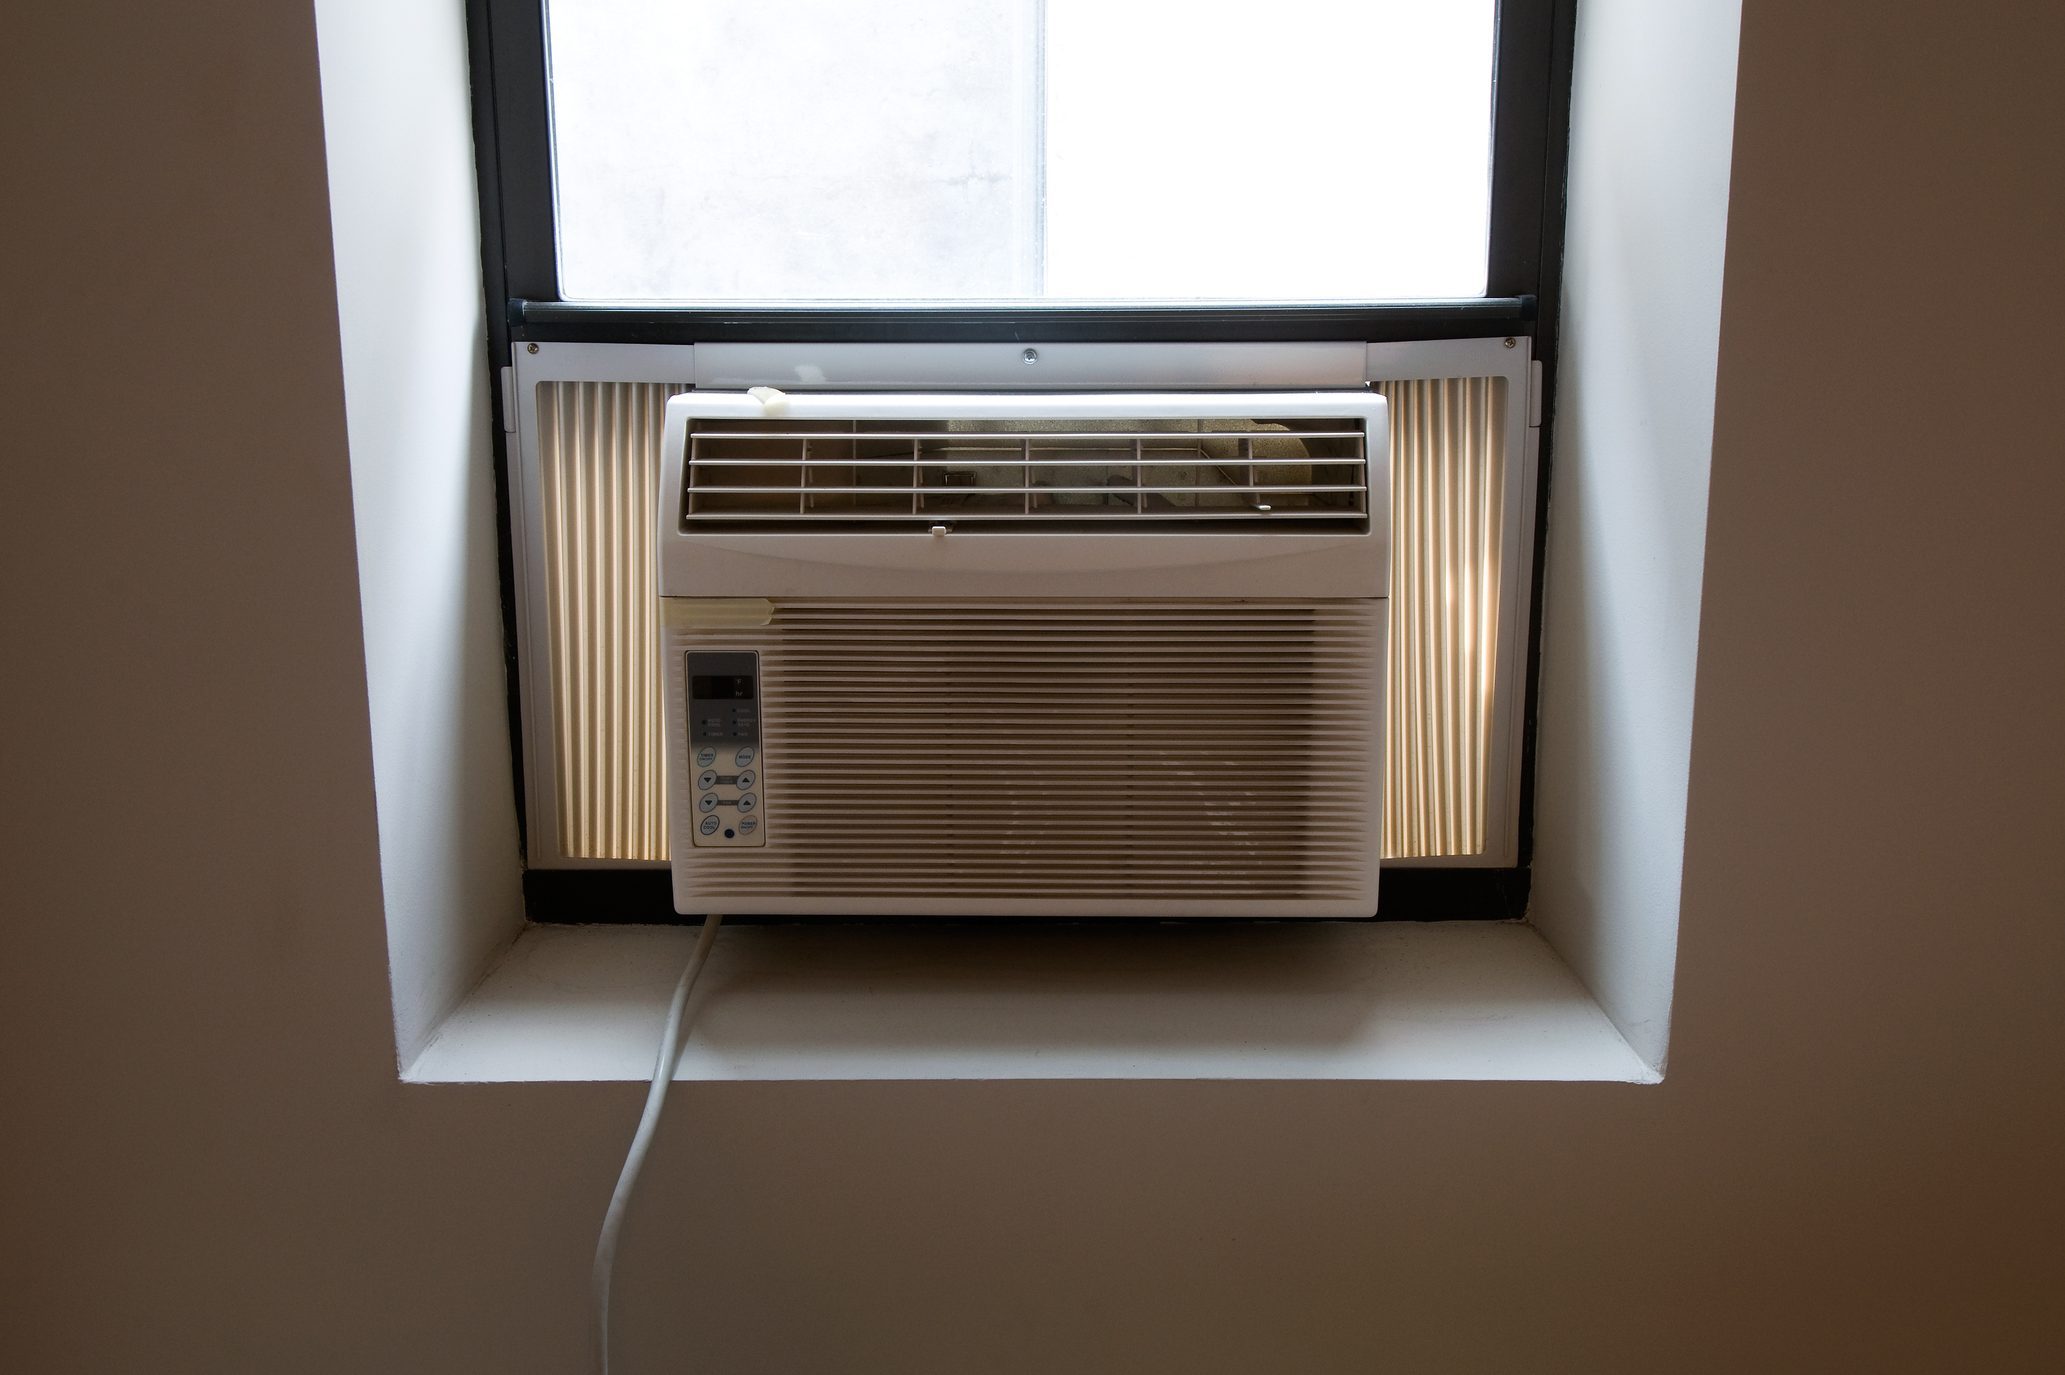 How To Fix an Air Conditioner That’s Leaking Water Inside